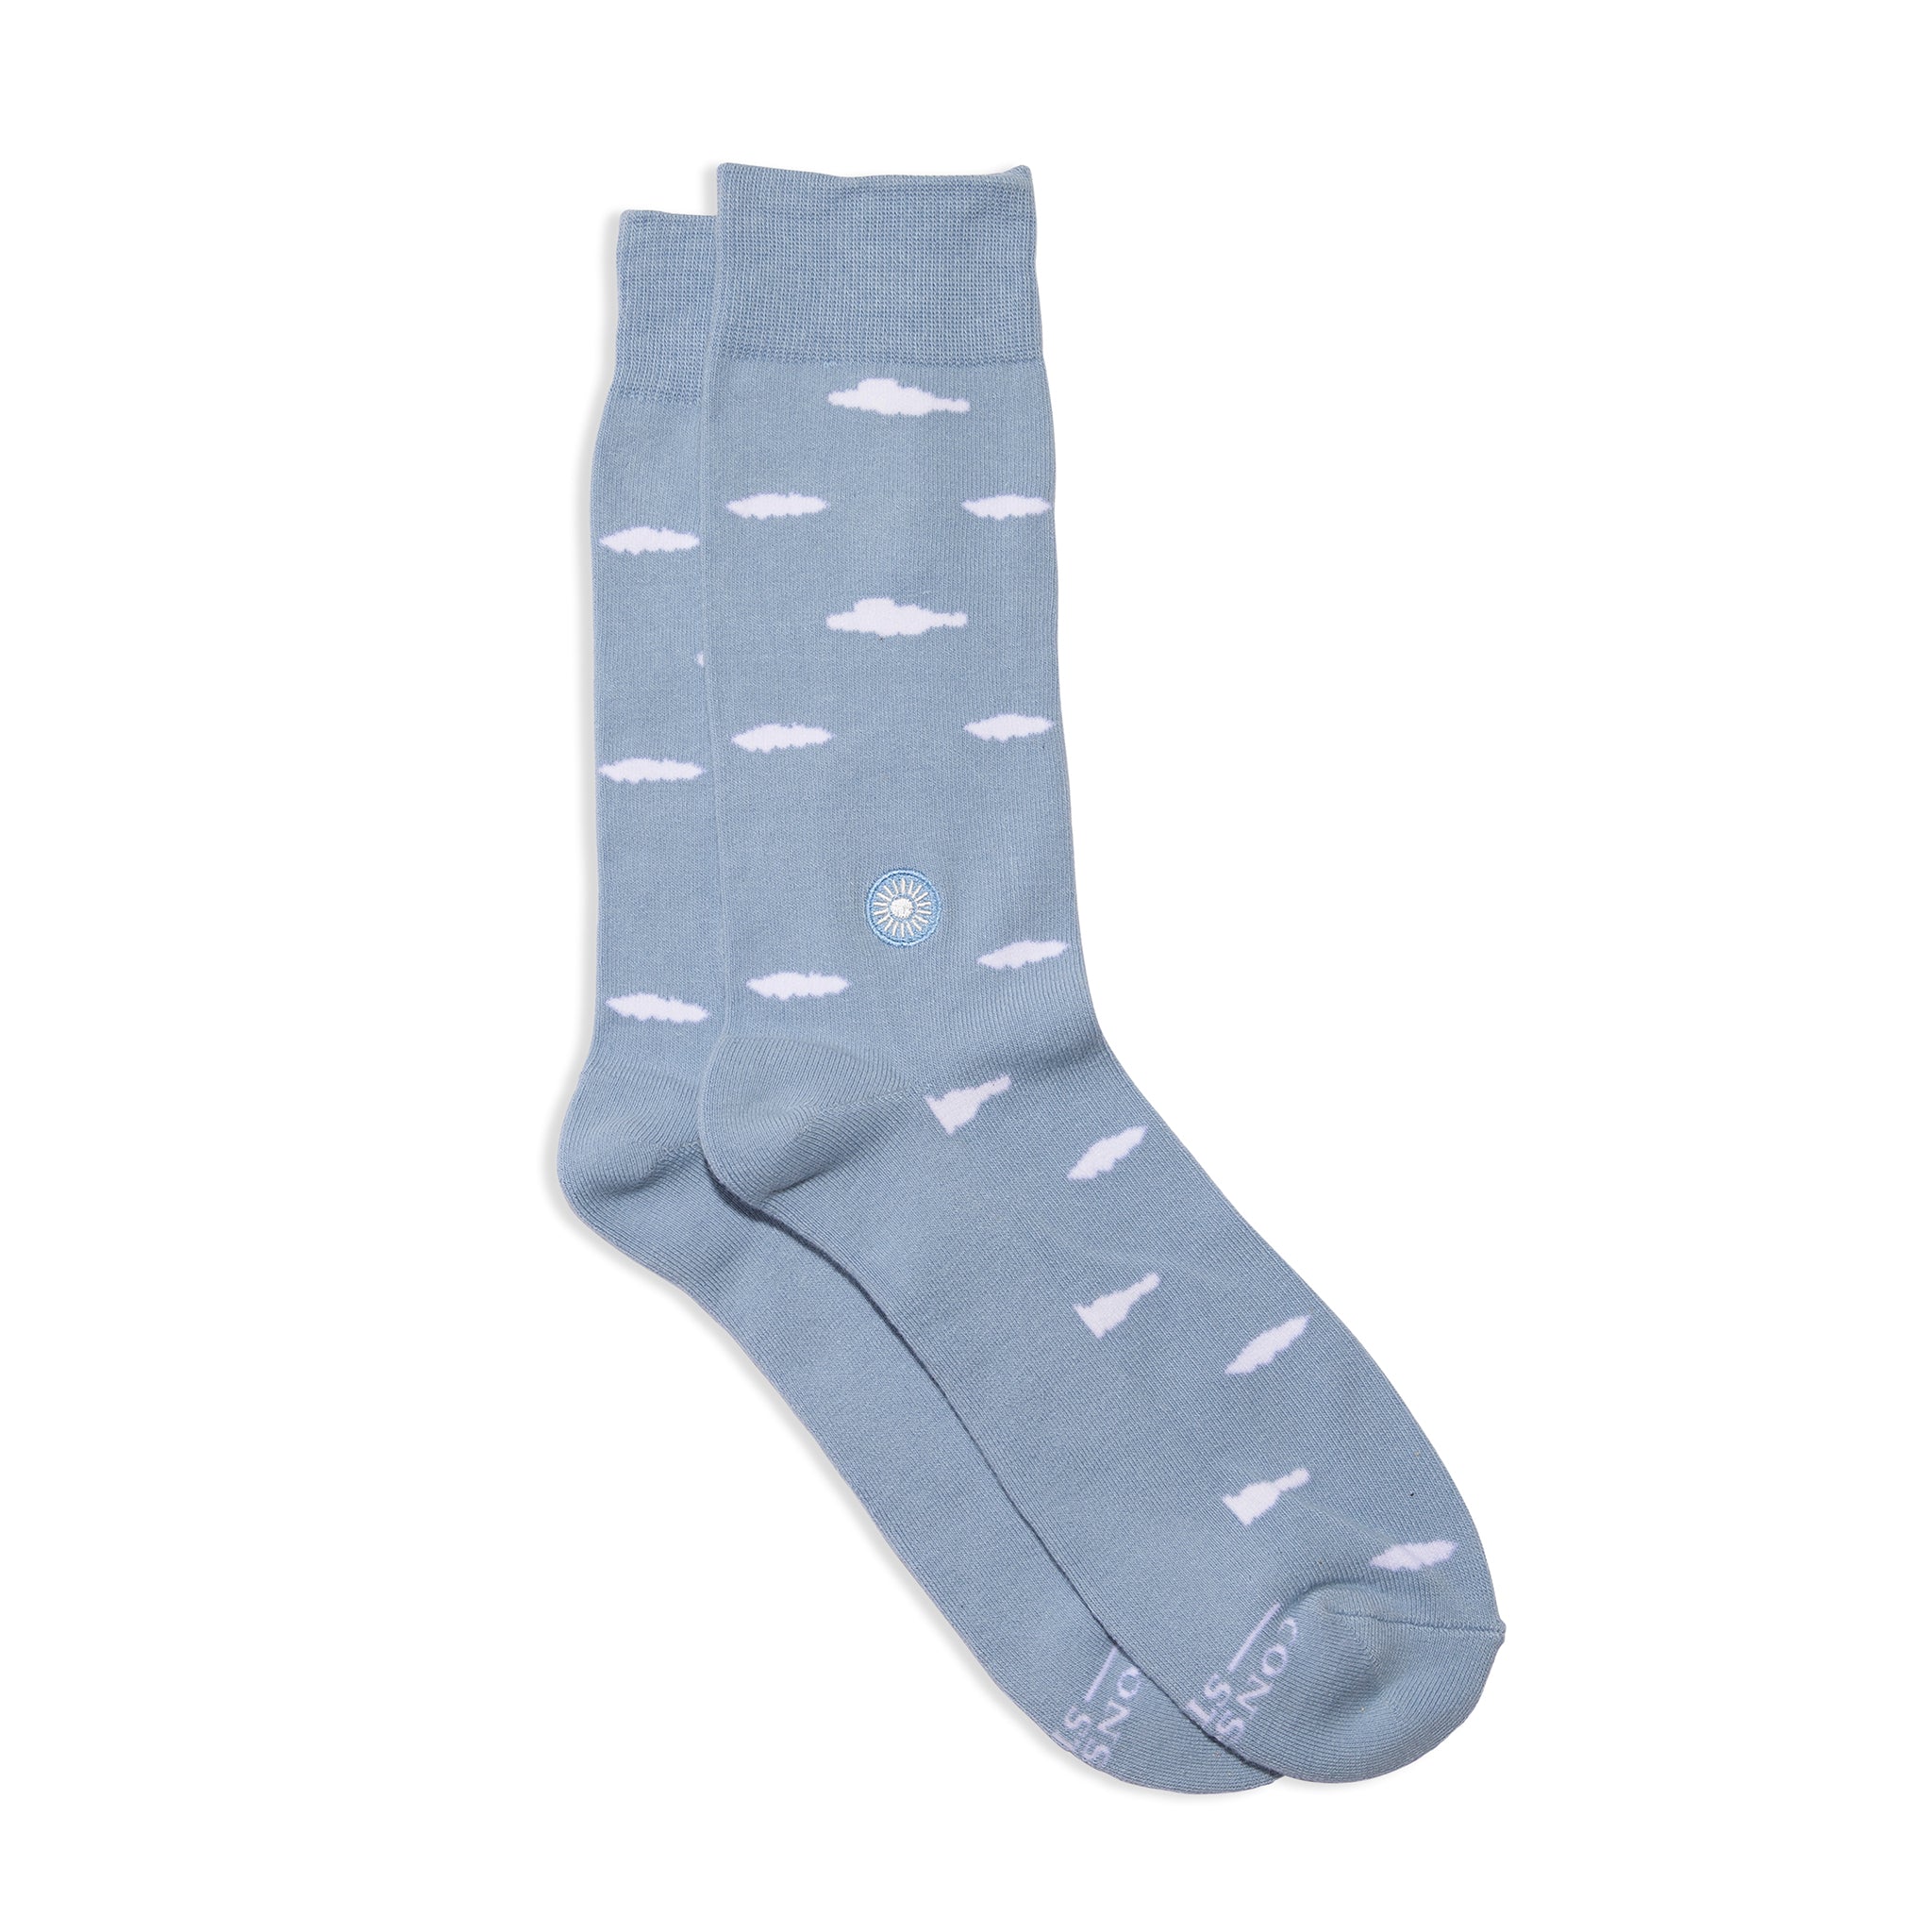 Socks that Support Mental Health | Every Pair Gives Back – Conscious Step